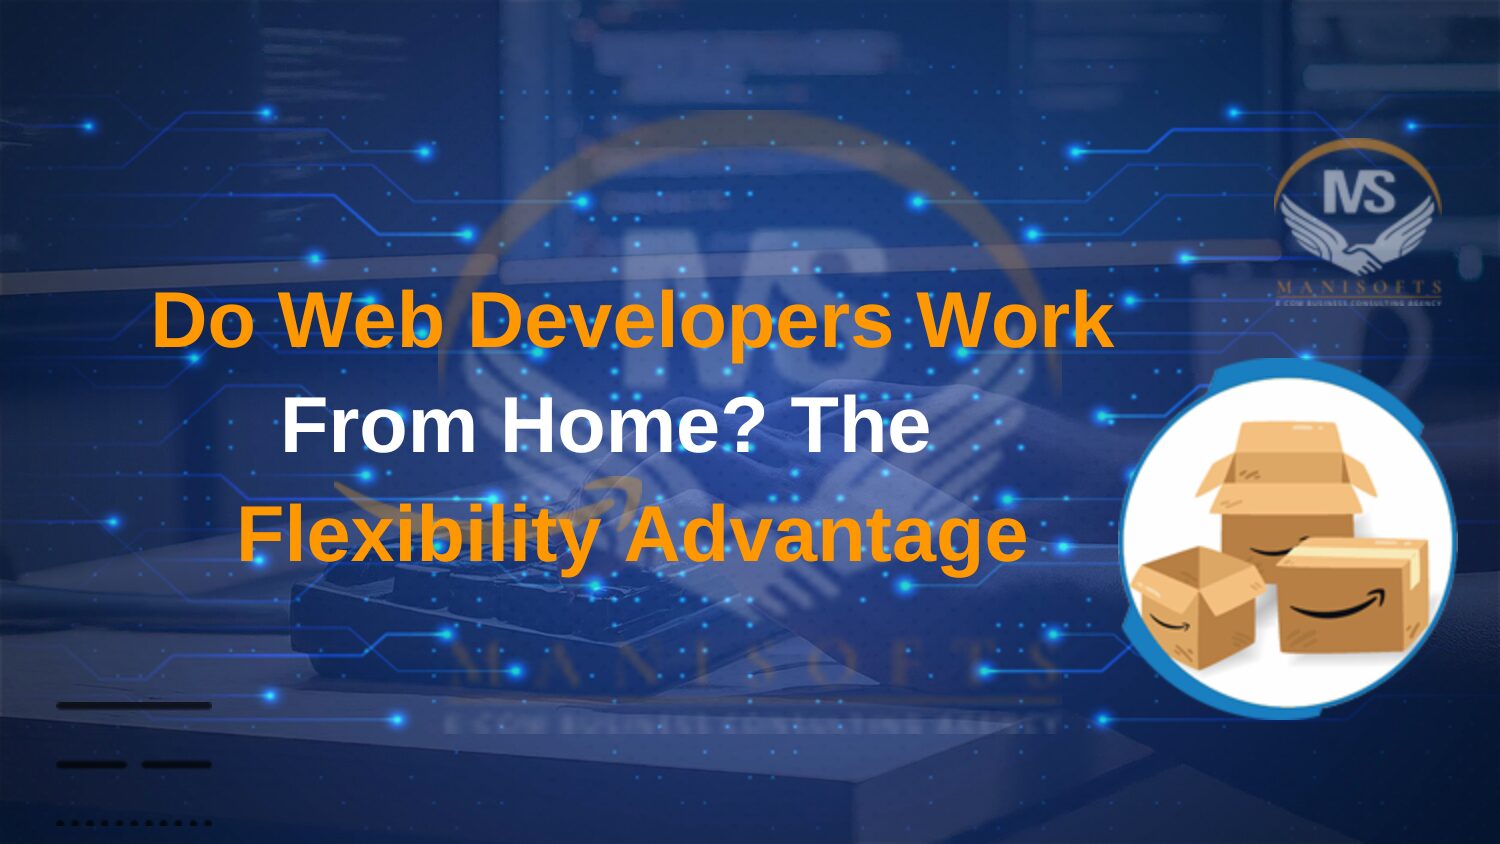 Do Web Developers Work From Home